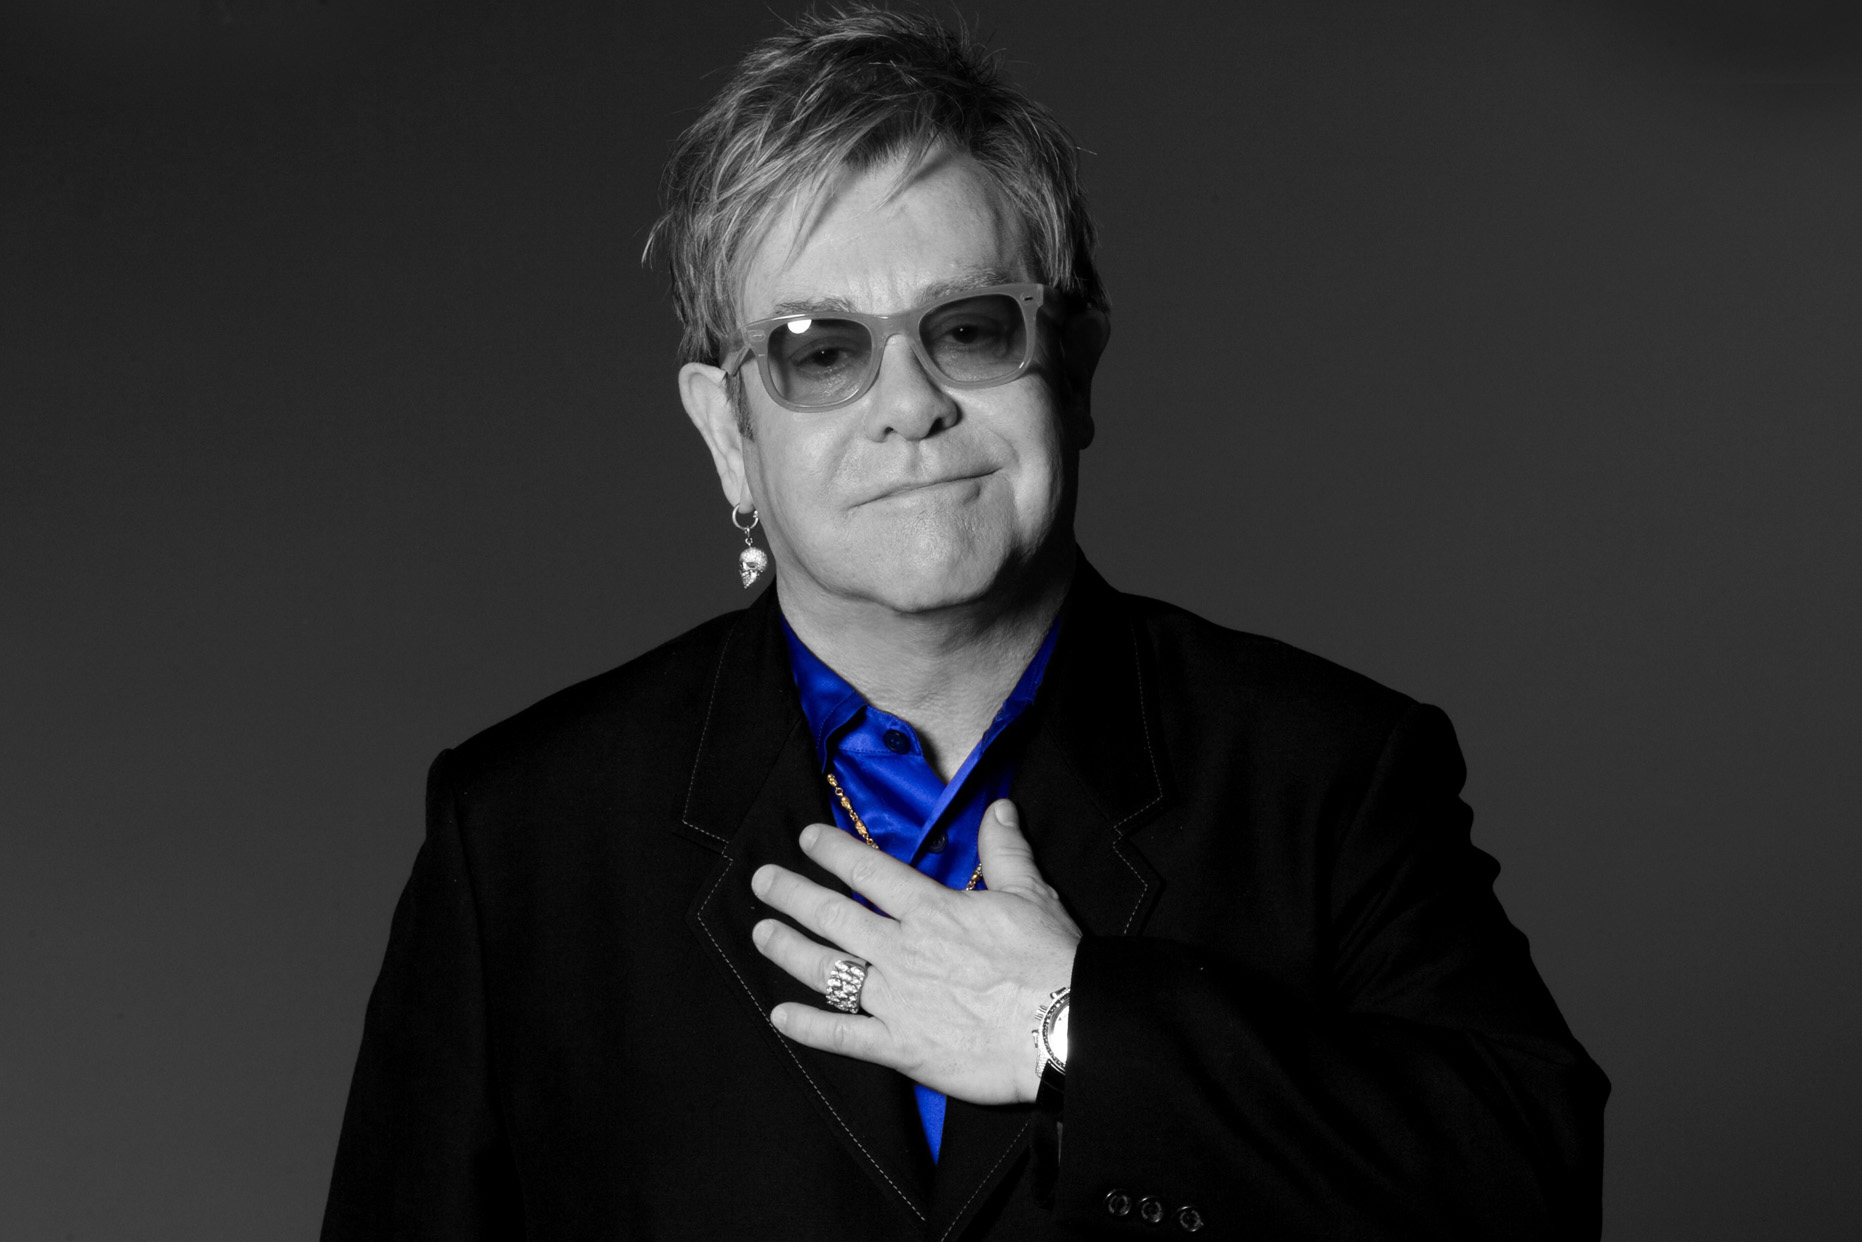 "Without a leader who has charm - even if negative - success will not come". Sir Elton John's rules of leadership